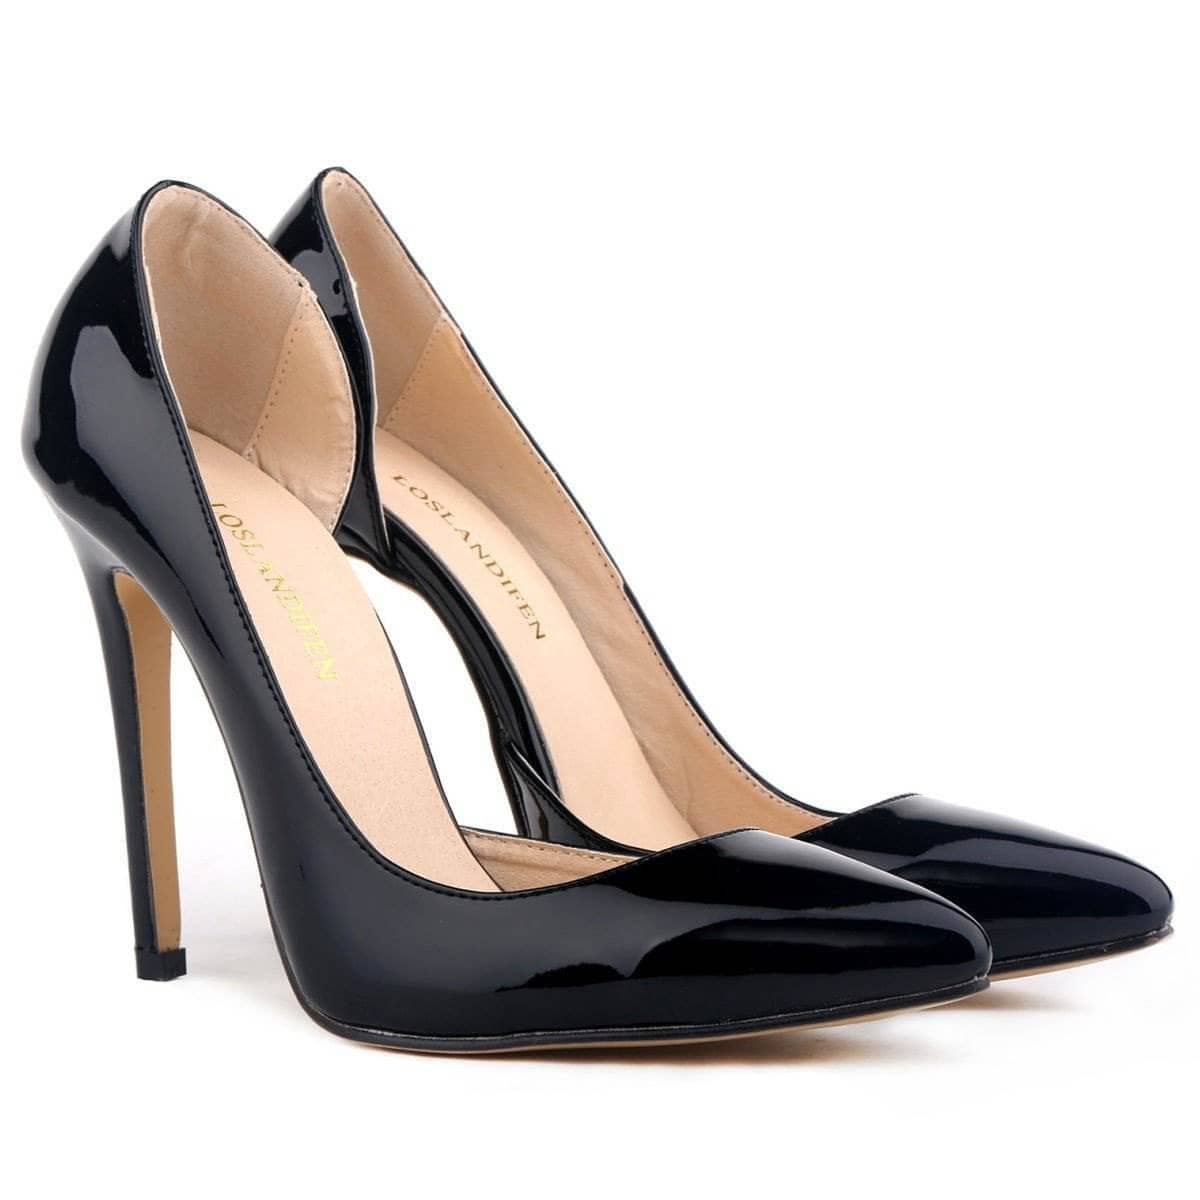 Jimmy Hoo Accessories Black Classic Pumps - Two Colors